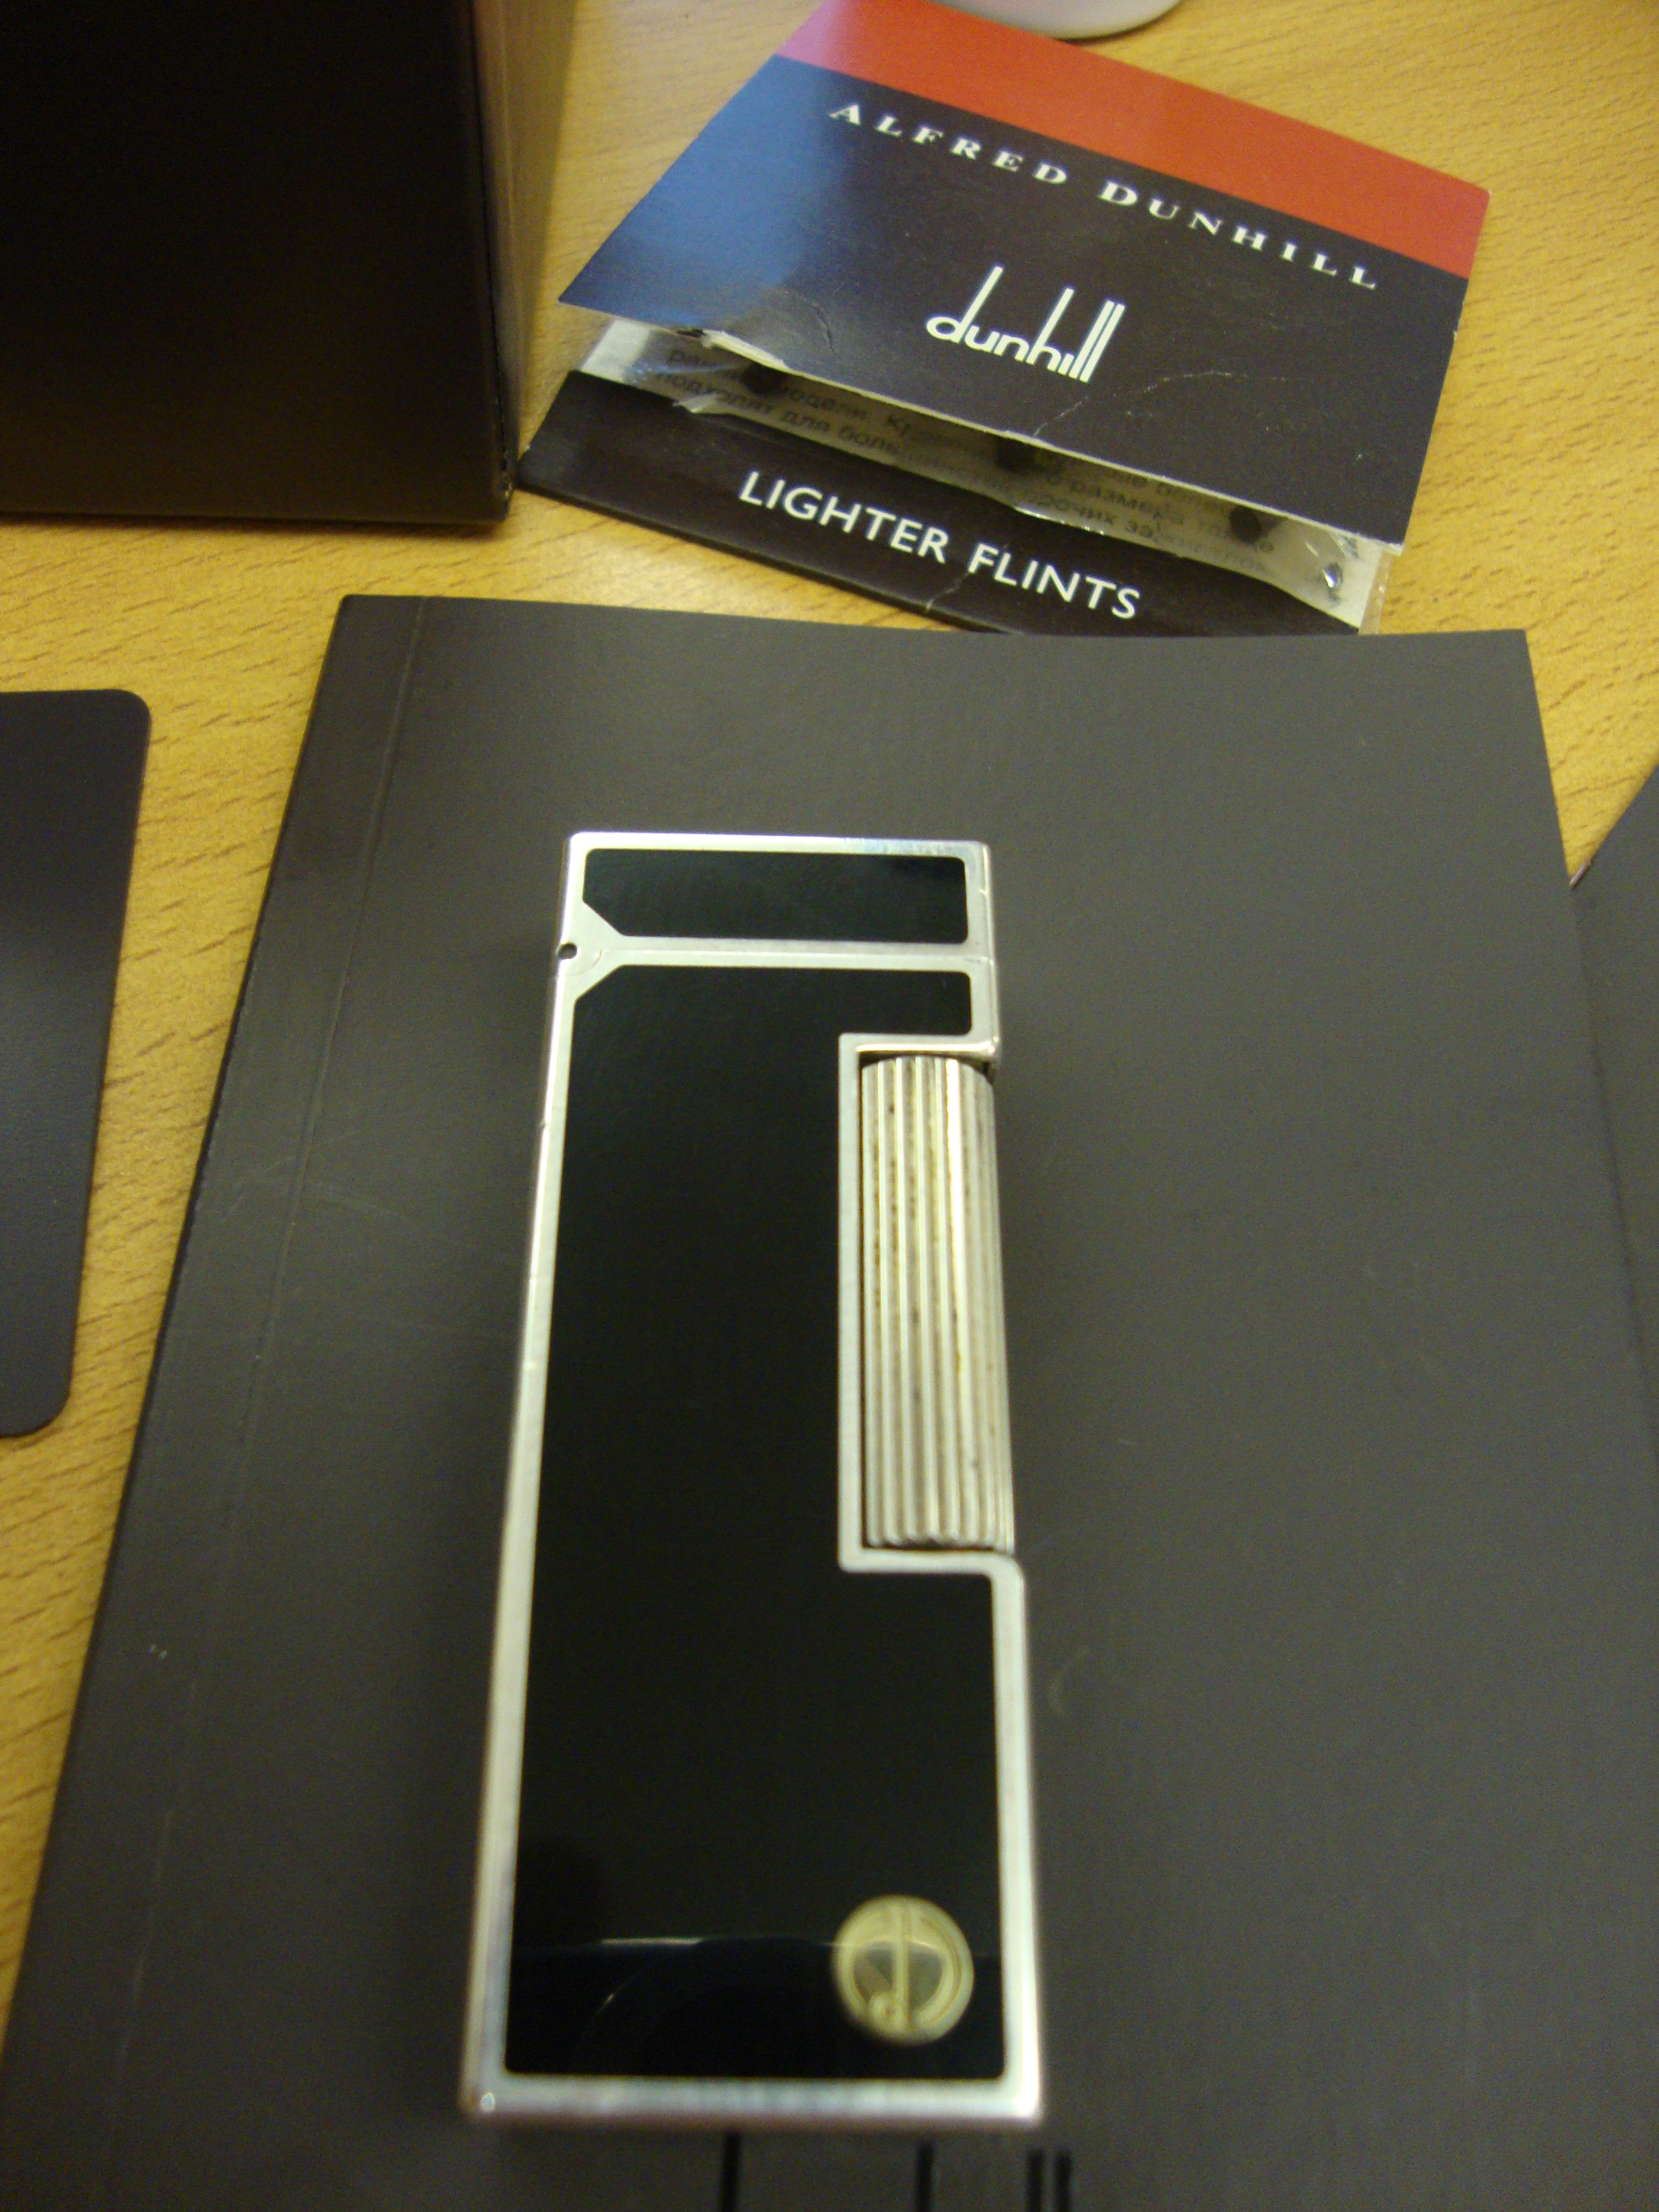 Dunhill rollagas lighter, model RL2301, in black laquer and silver, including box, book packs & - Image 5 of 12